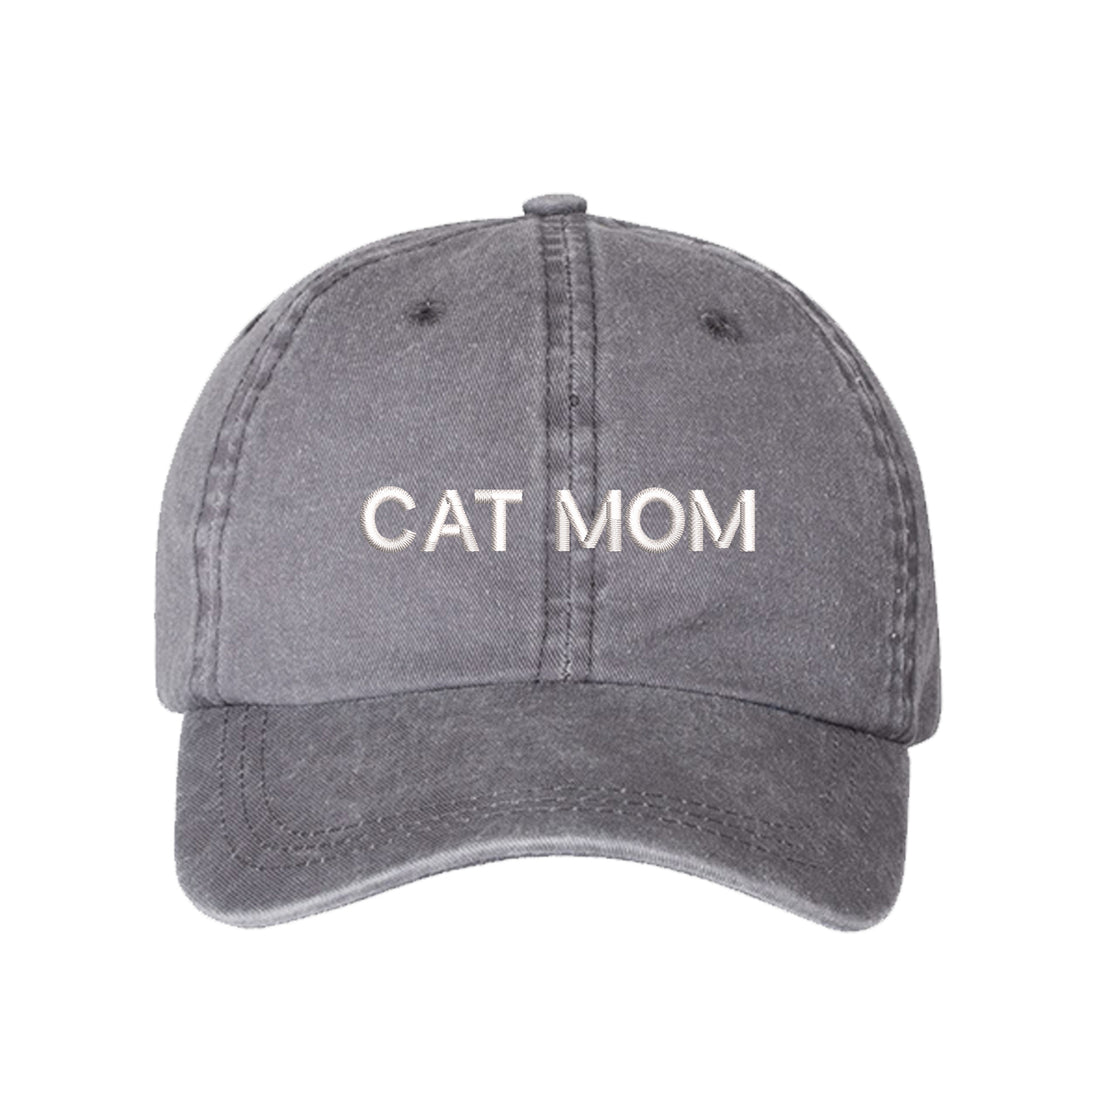 Cat Mom Washed Baseball Hat, Cat Mom Hat, Embroidered Dad Hat, Cat Mom, Cat Lover Hats, Cat Hats, DSY Lifestyle Hat, Gray Washed Dad Hat